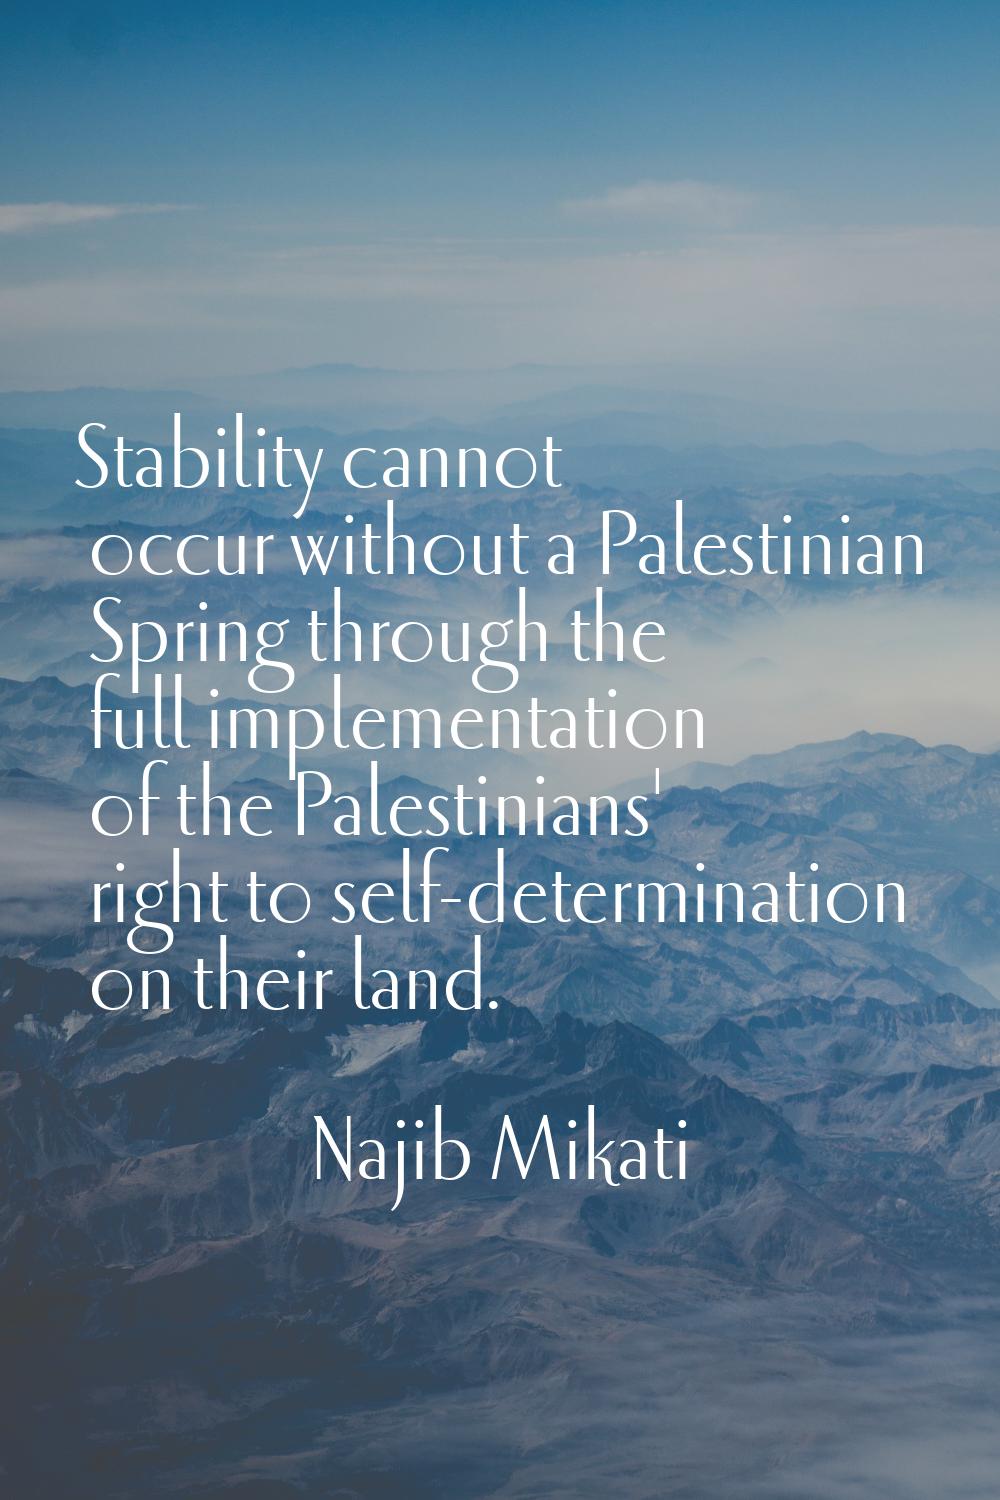 Stability cannot occur without a Palestinian Spring through the full implementation of the Palestin